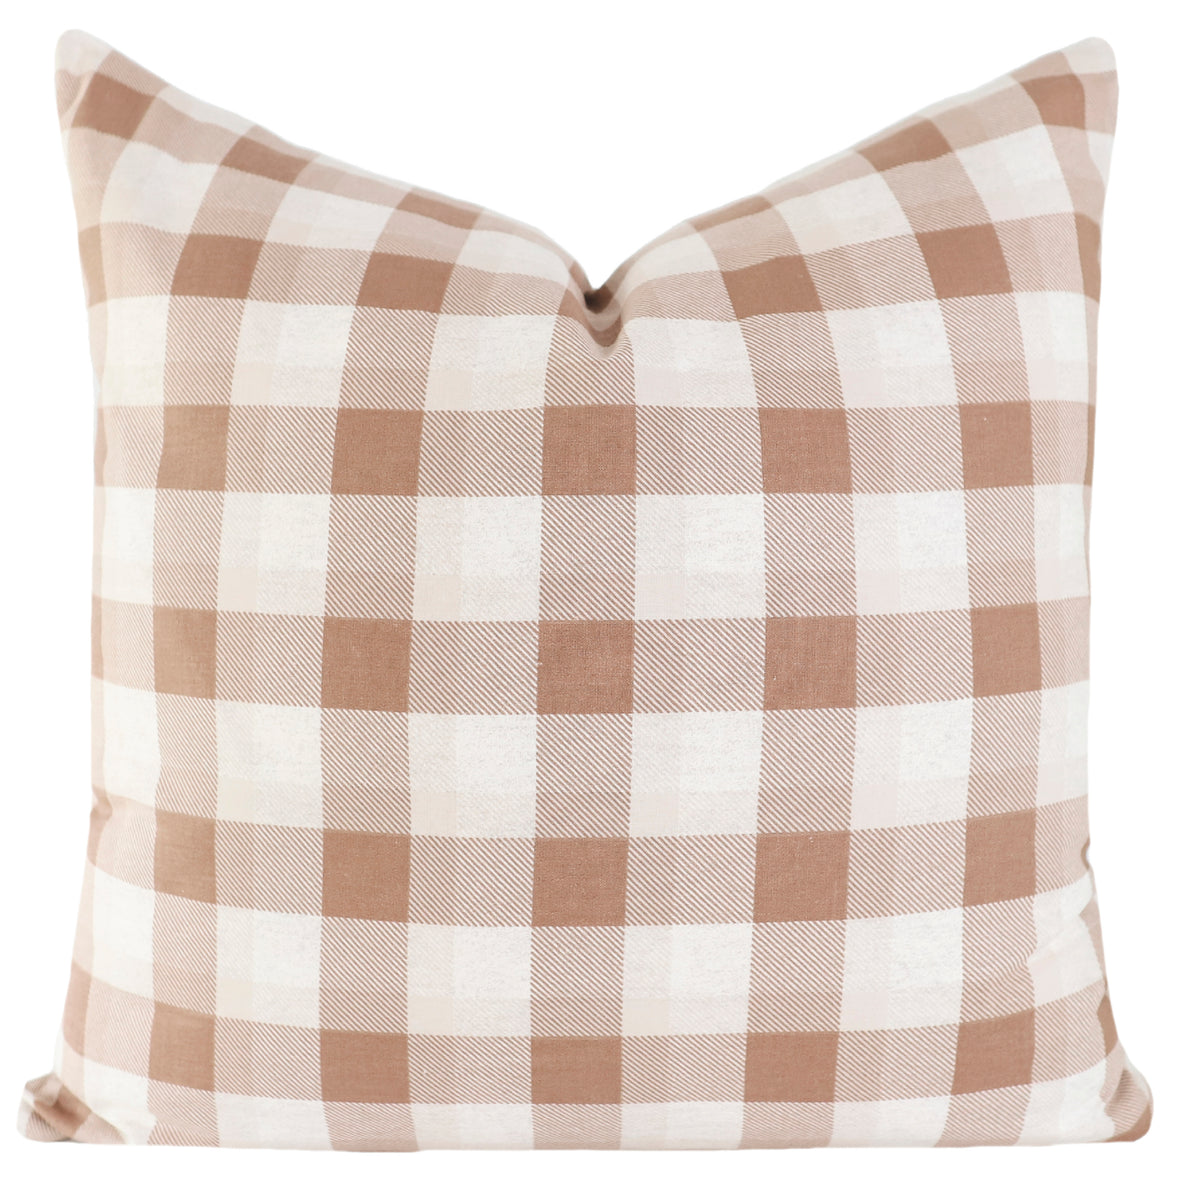 August Plaid Pillow Cover